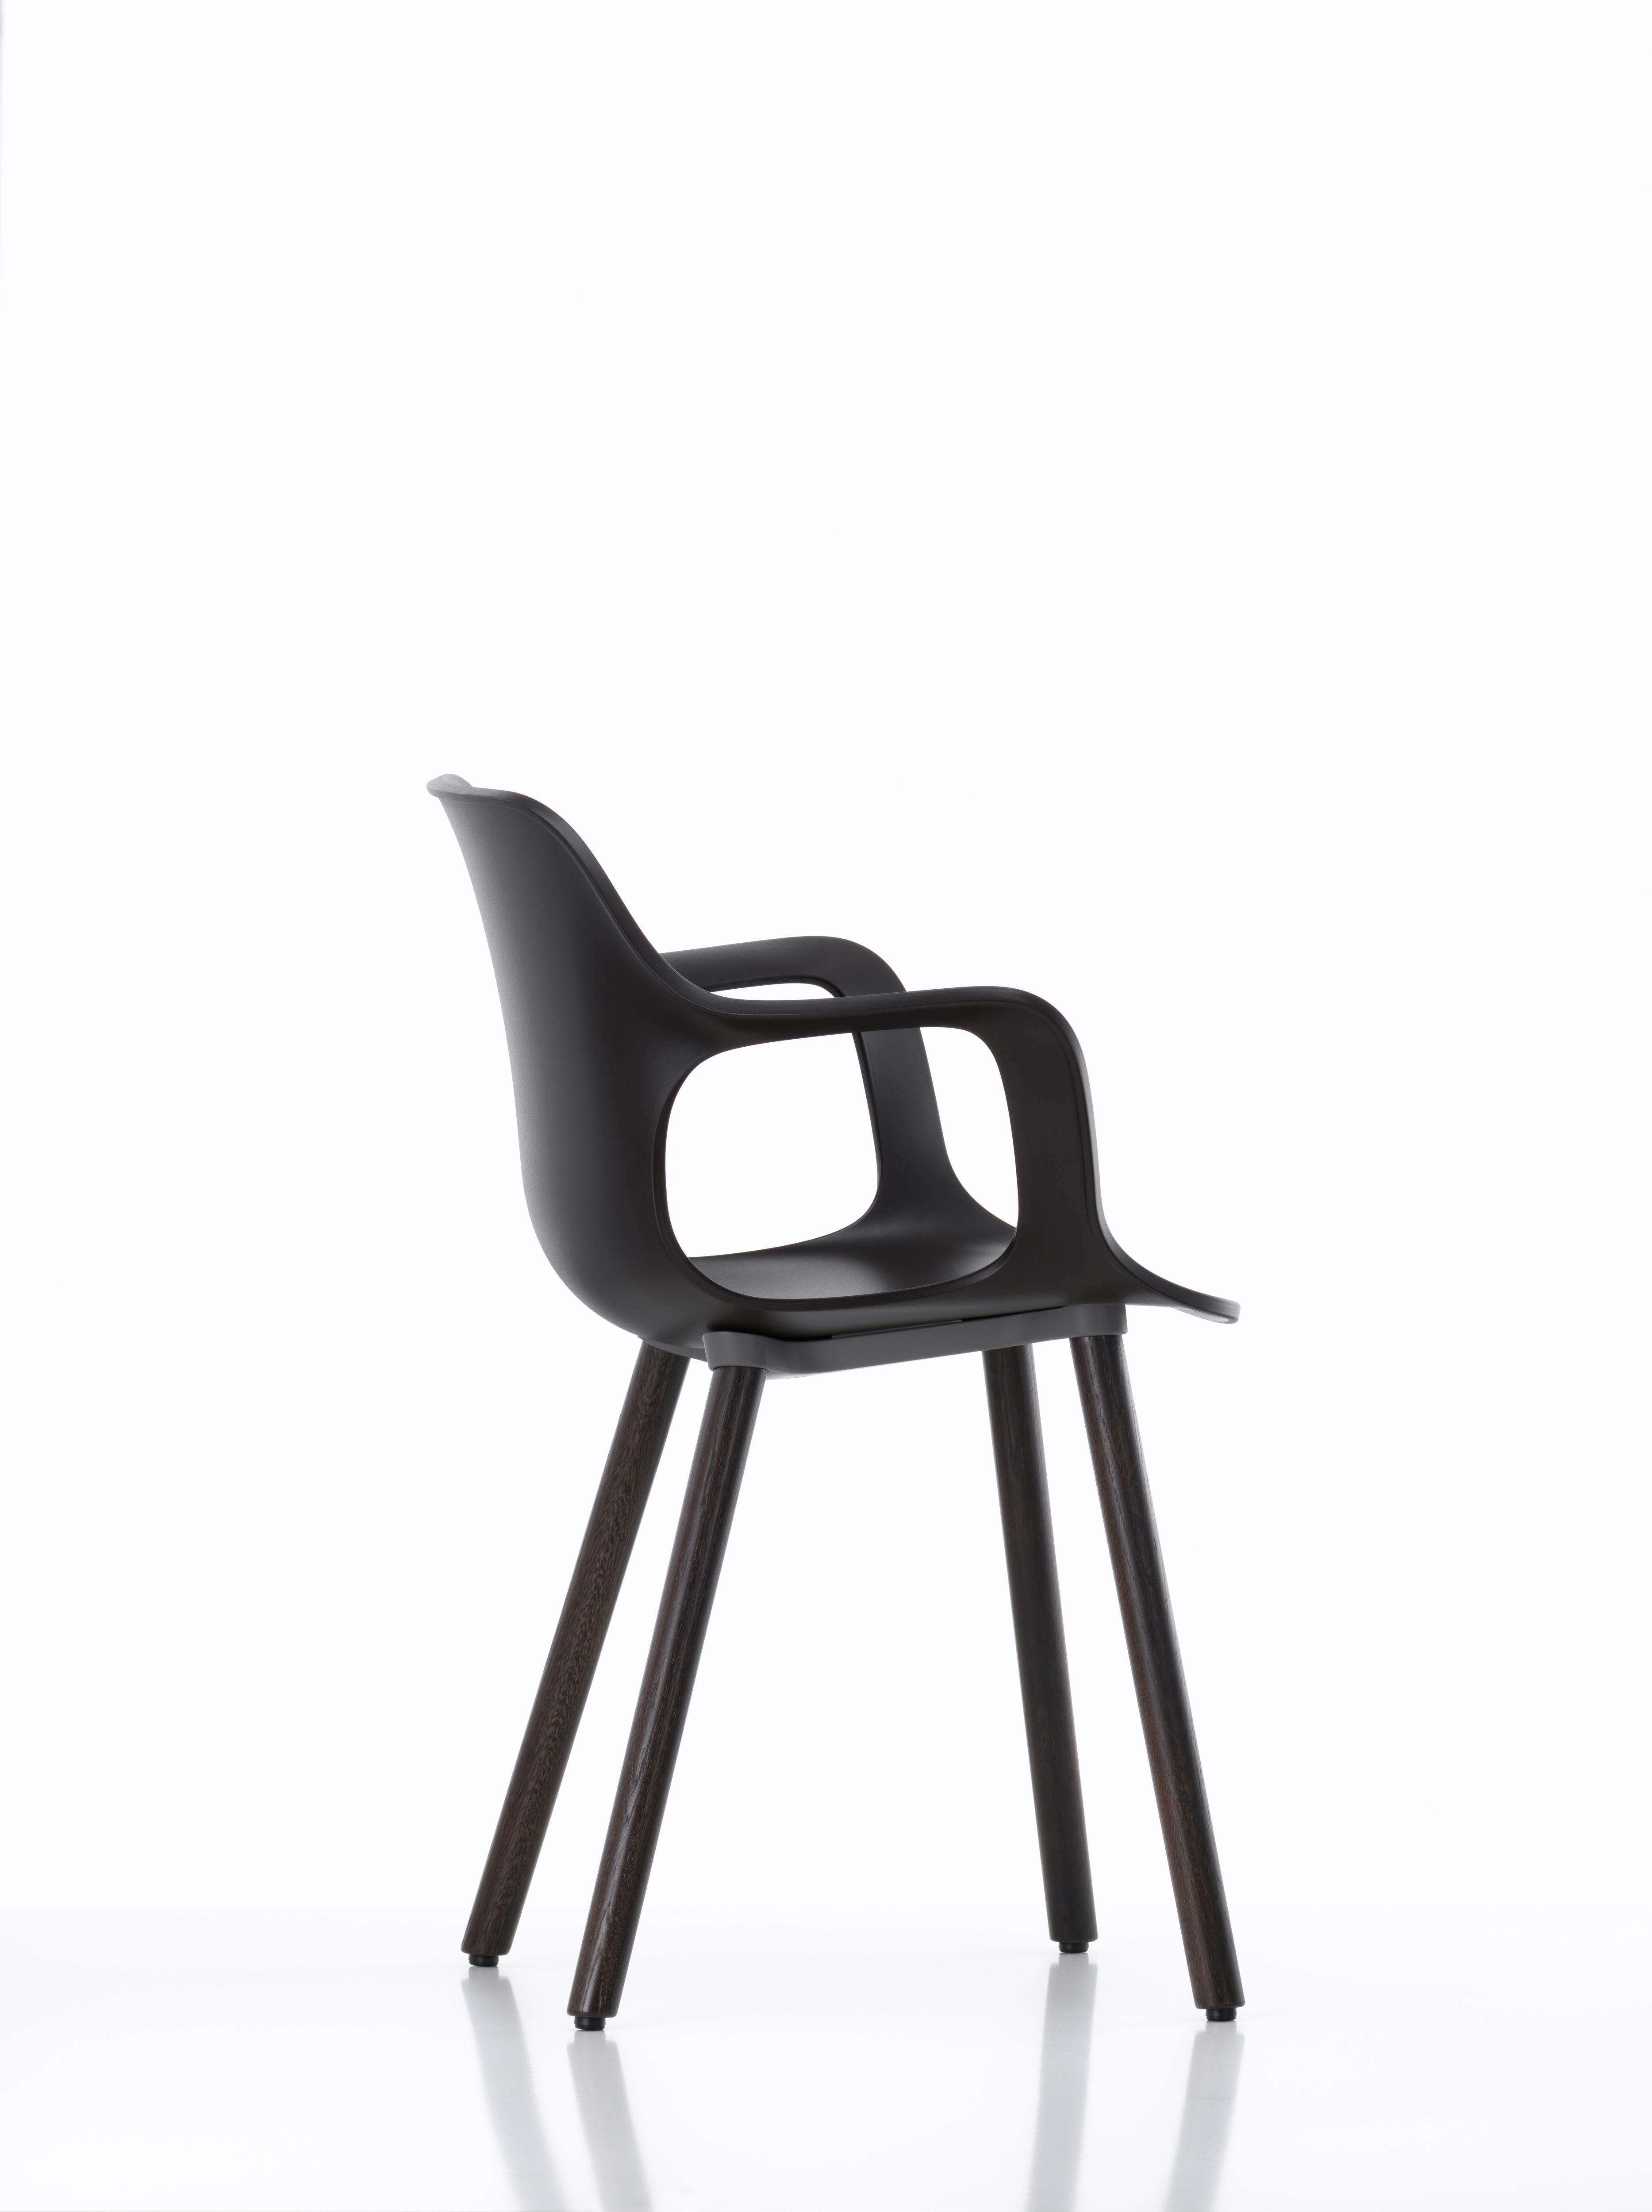 These products are only available in the United States.

Vitra HAL Armchair Wood in Chocolate by Jasper Morrison.

Materials:
Seat shell: Dyed-through polypropylene.
Base: Non-stackable wooden base in dark oak Connecting element between shell and